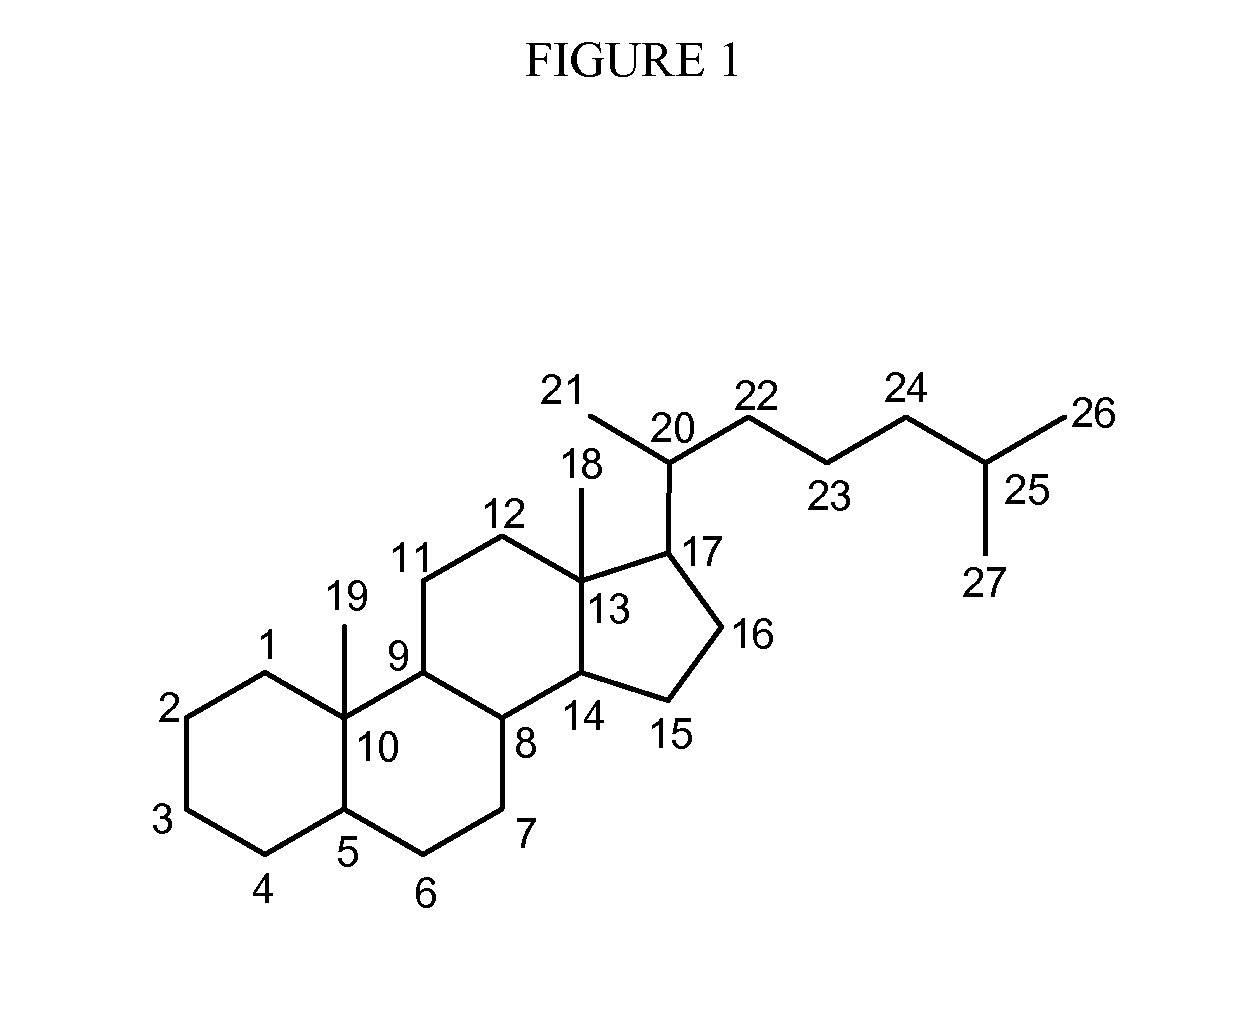 Synthetic bile acid compositions and methods